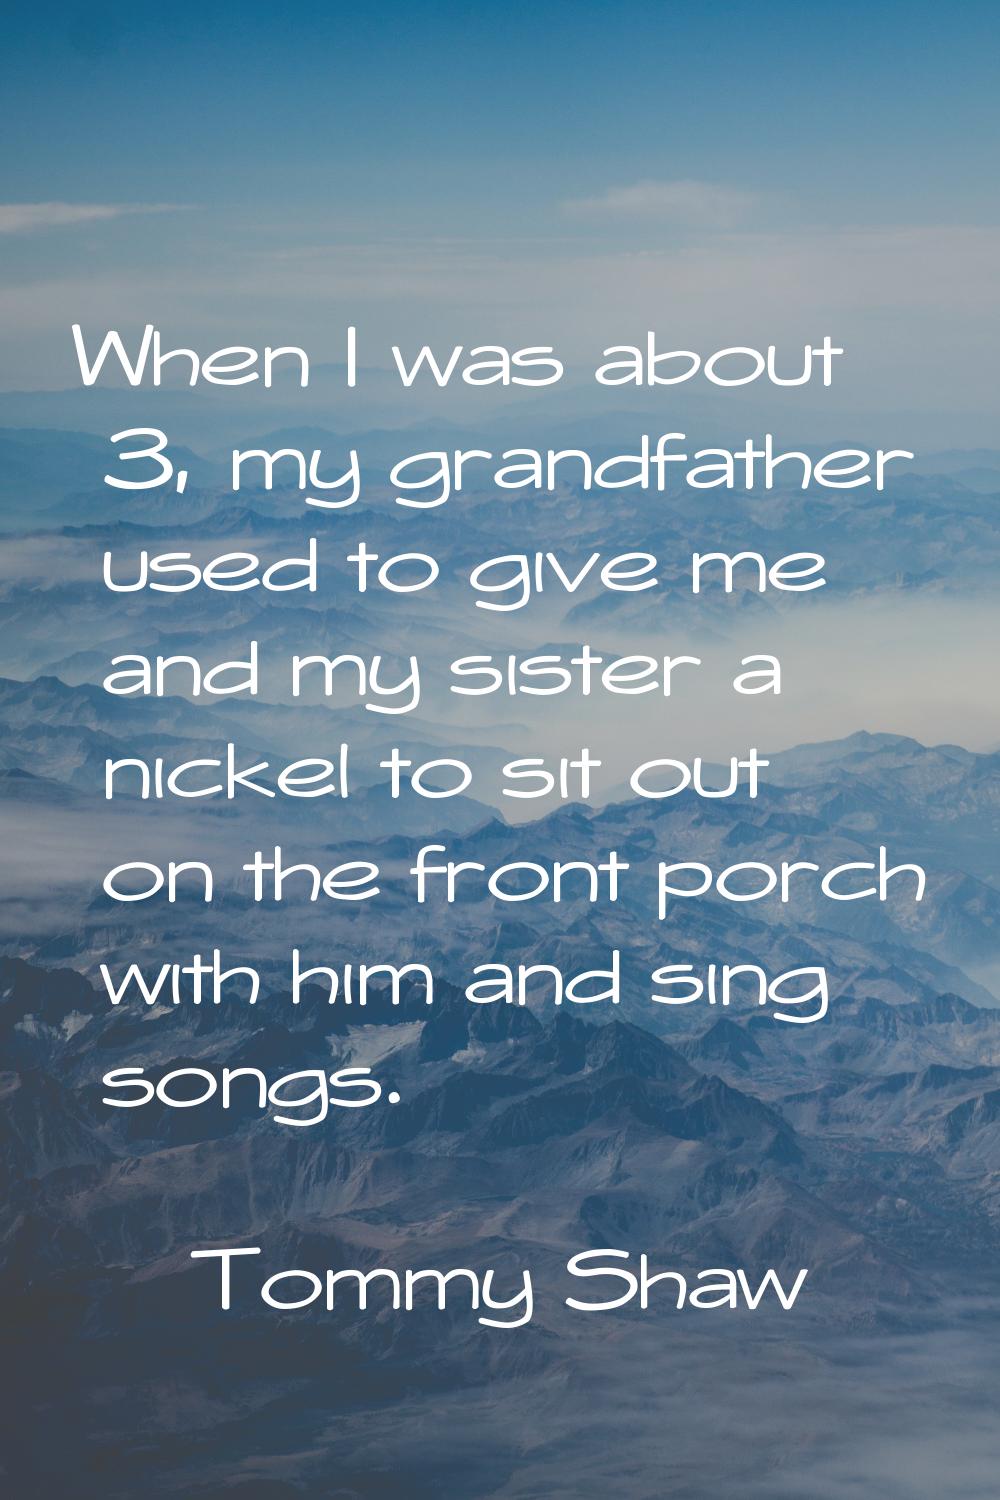 When I was about 3, my grandfather used to give me and my sister a nickel to sit out on the front p